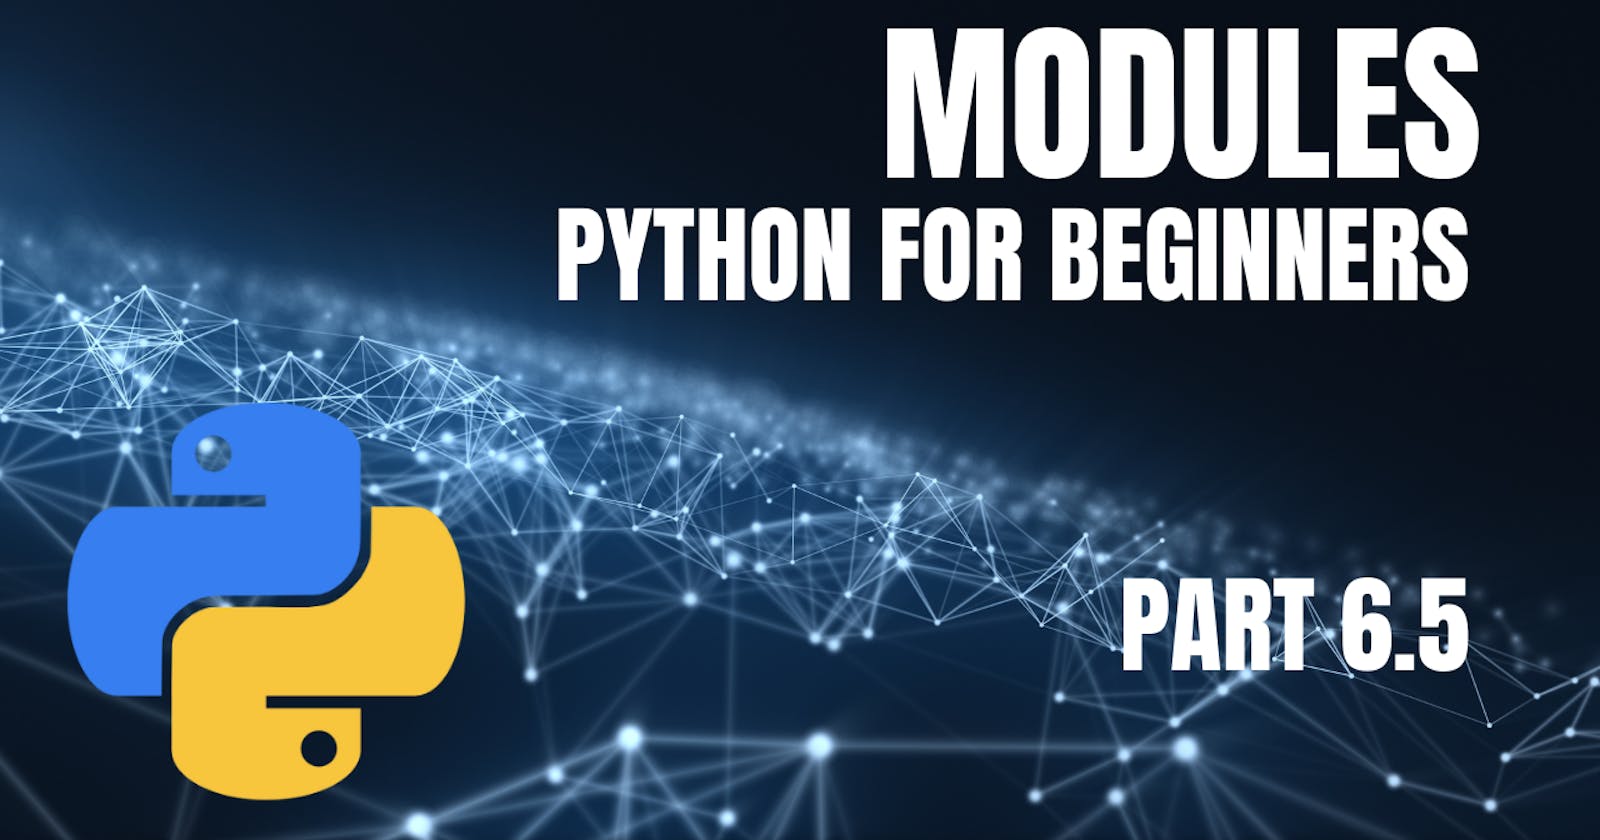 Python for Beginners: Part 6.5 - Exploring Modules